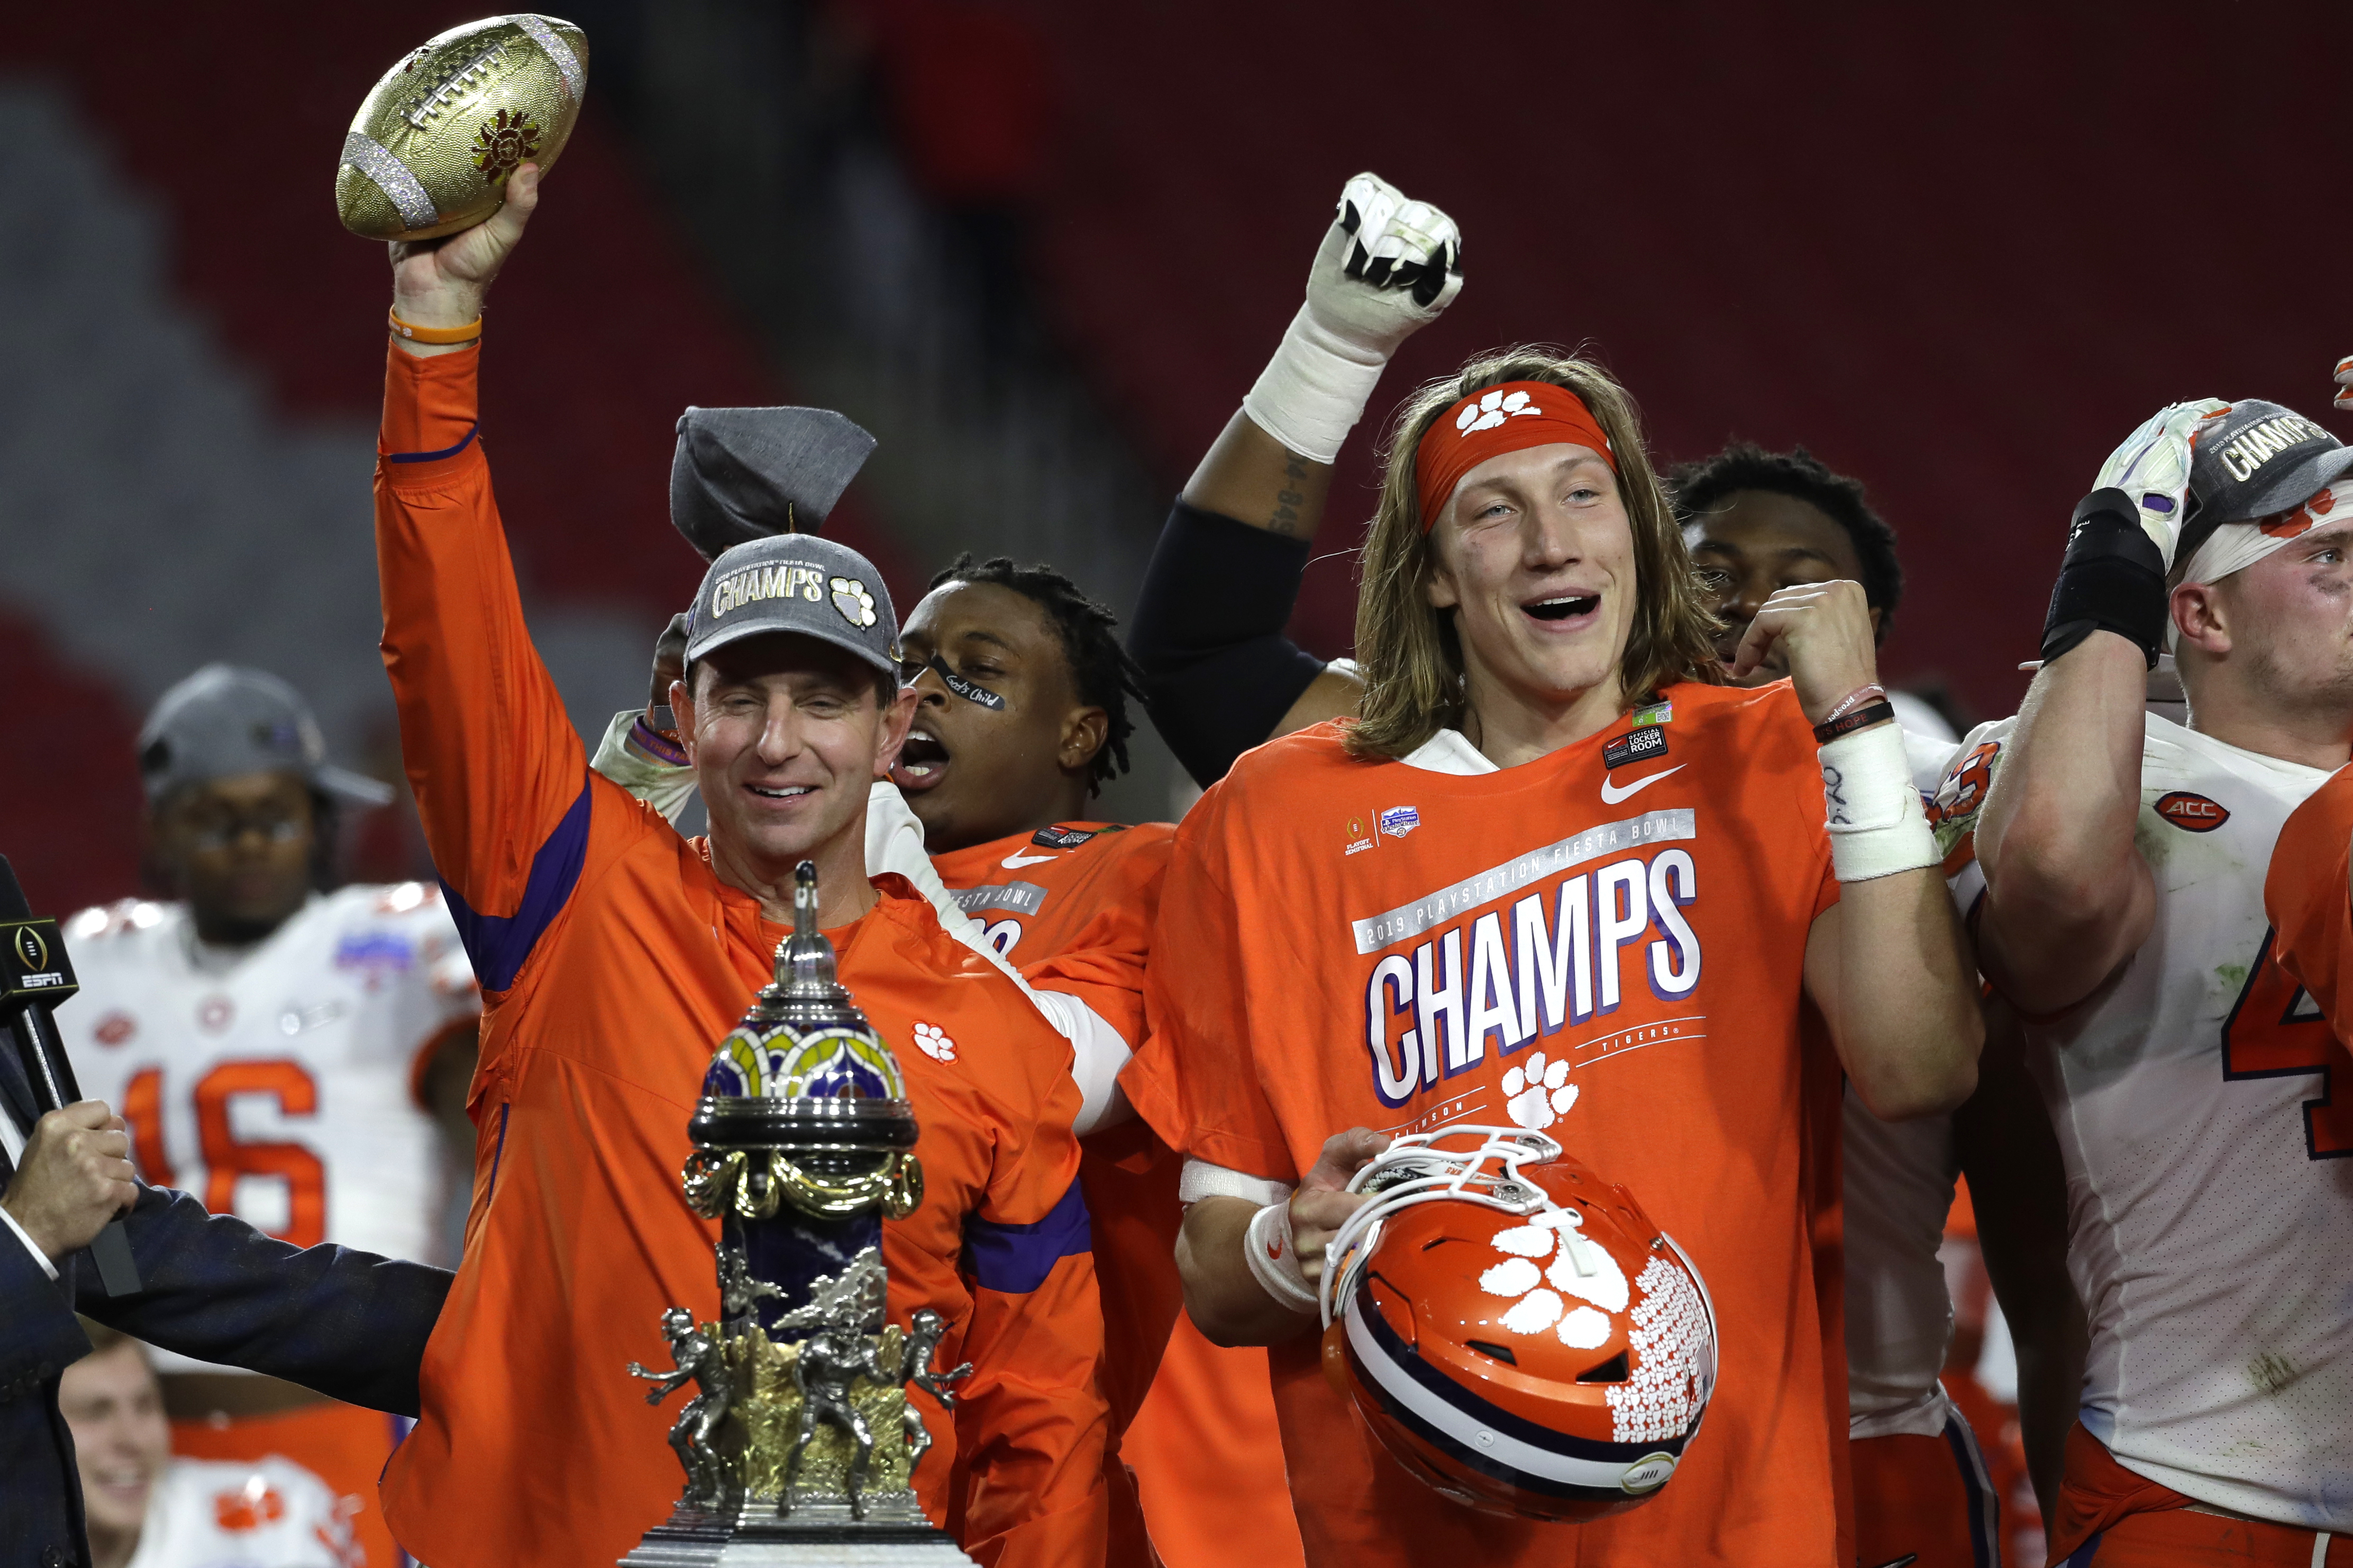 NFL Draft 2021: Jets, Giants, Eagles among 17 teams watching Clemson's  Trevor Lawrence throw on Friday 